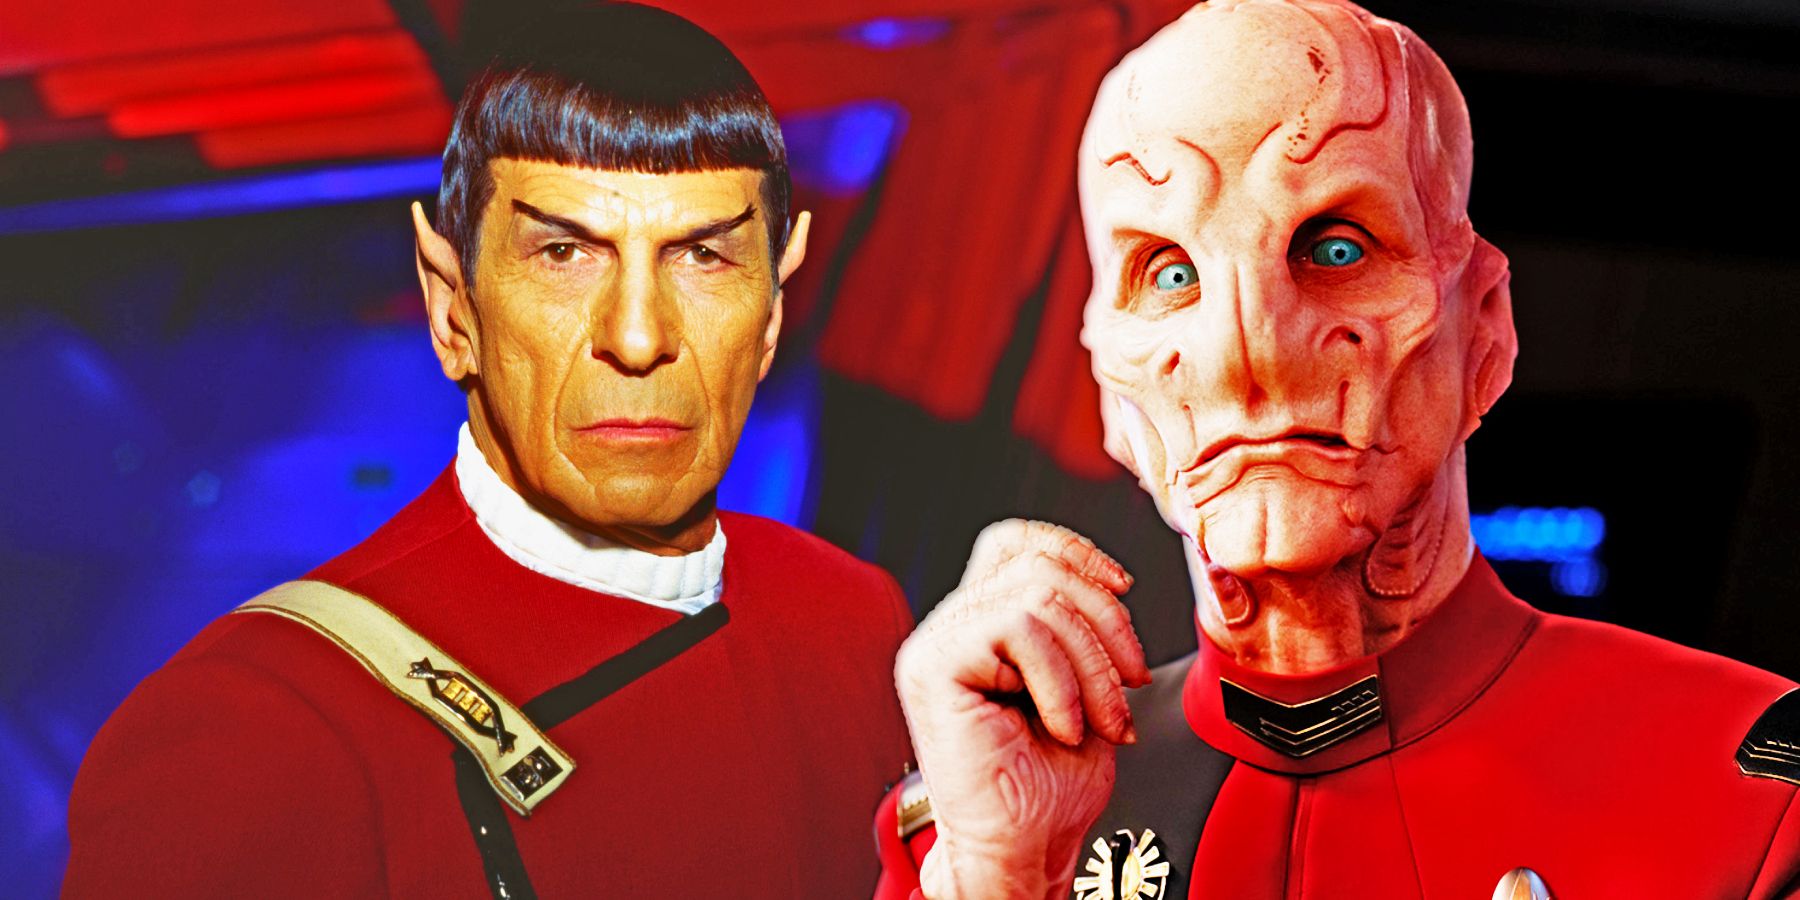 Composite image of Captains Spock and Saru from Star Trek